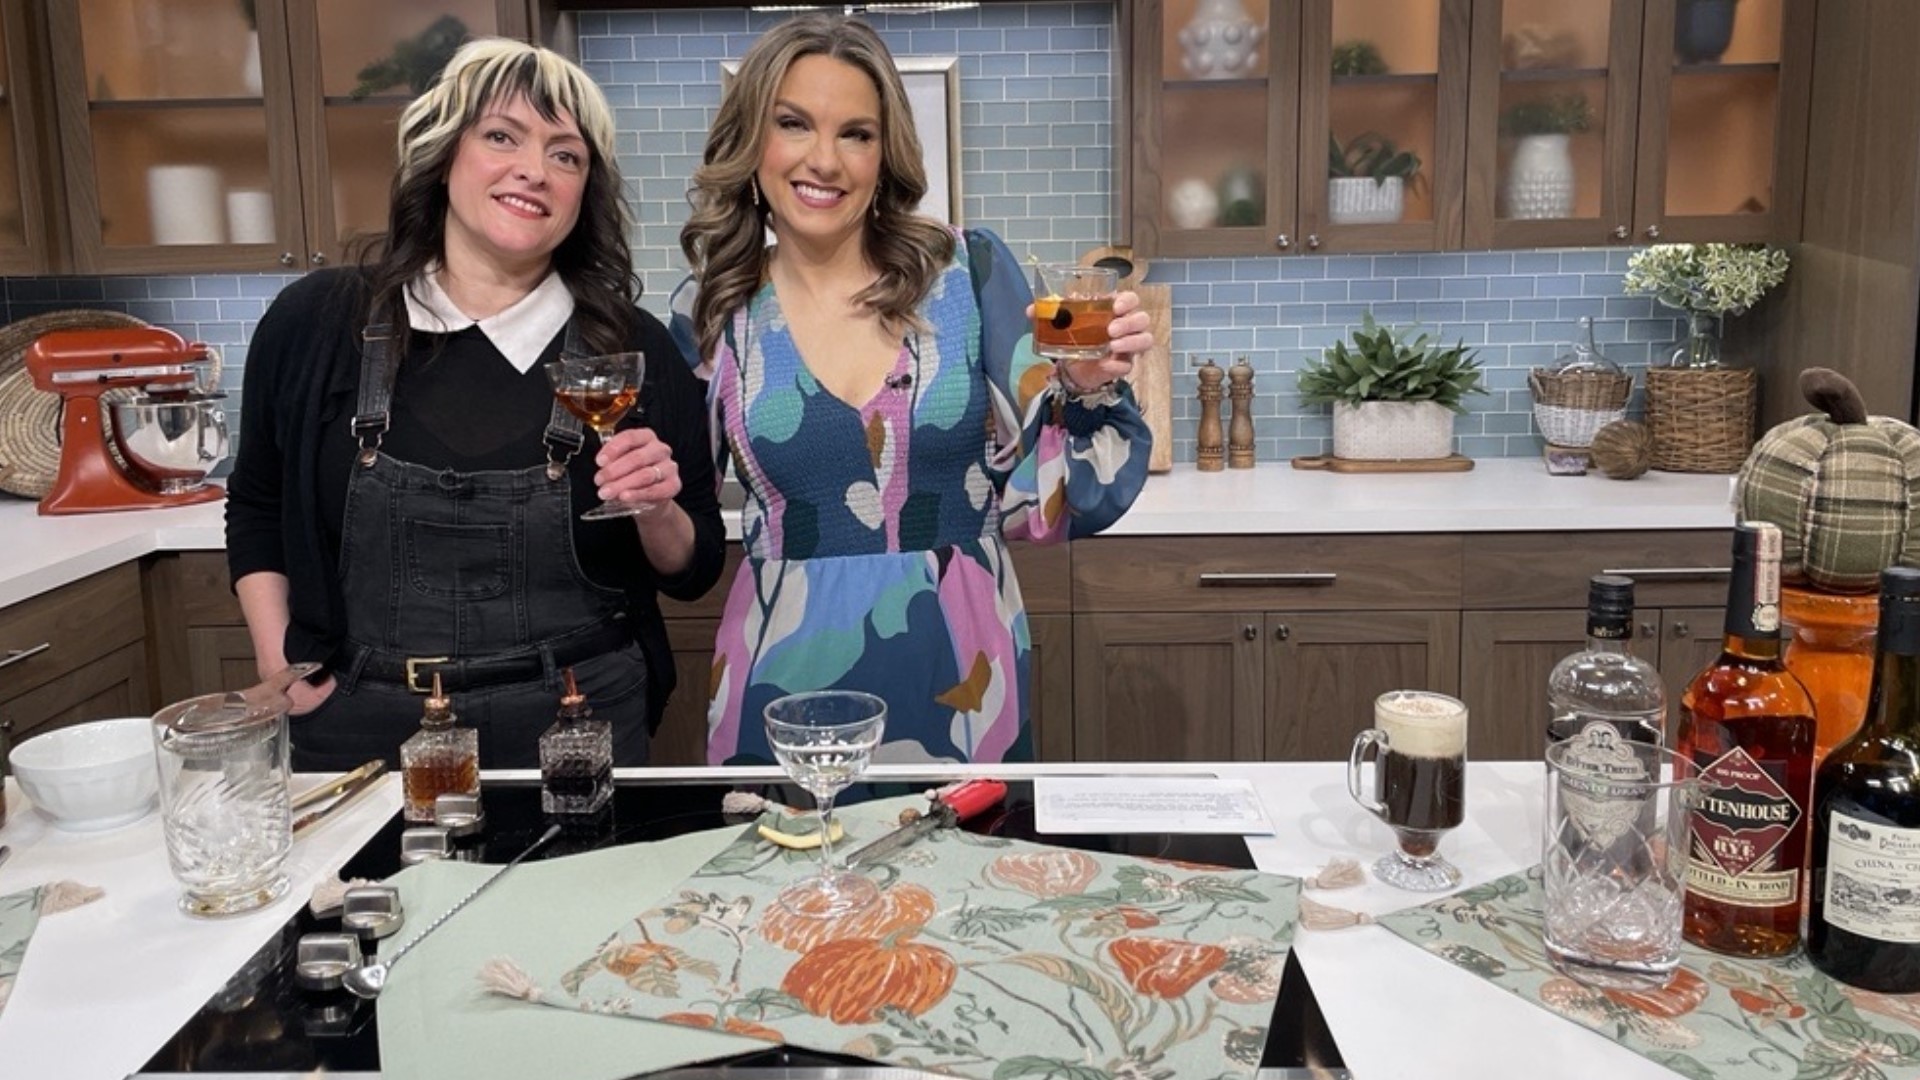 Master Mixologist Sara Rosales from Lady Jaye Restaurant and Butcher Shop joined the show to share some fall-forward cocktails. #newdaynw